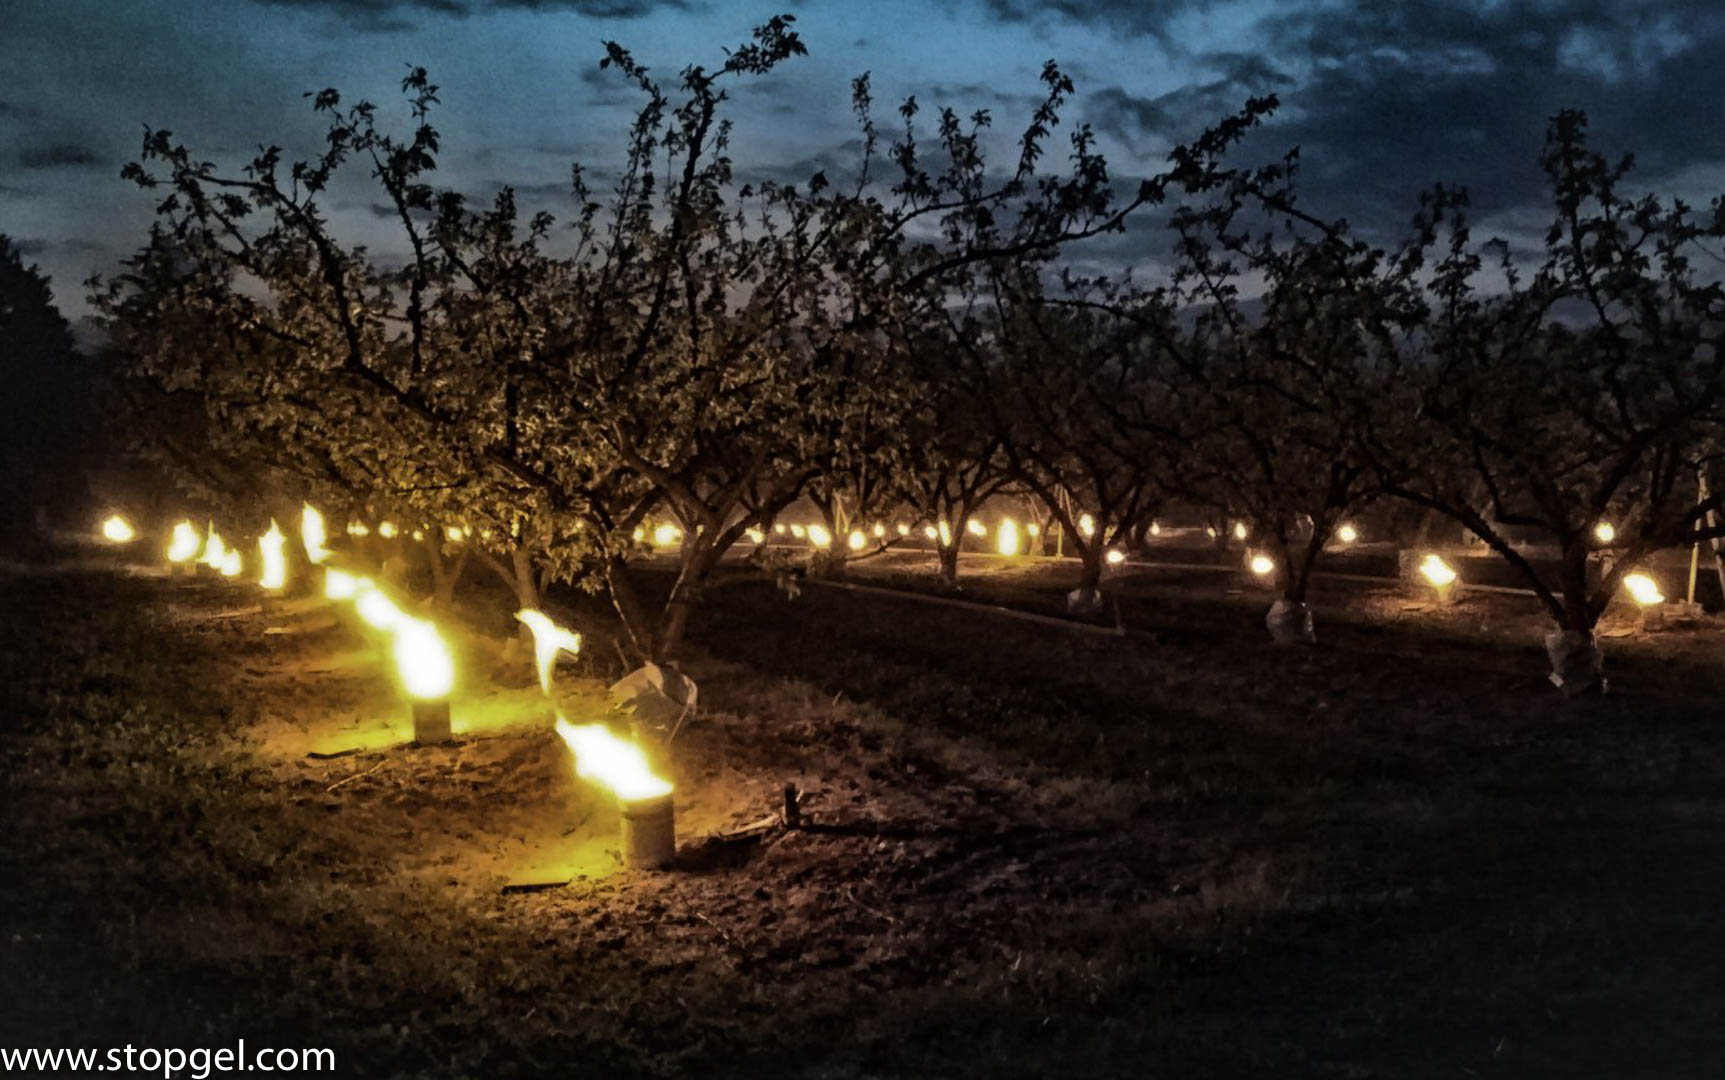 GREEN STOPGEL in a field of fruit trees produces 50% more energy than other candles